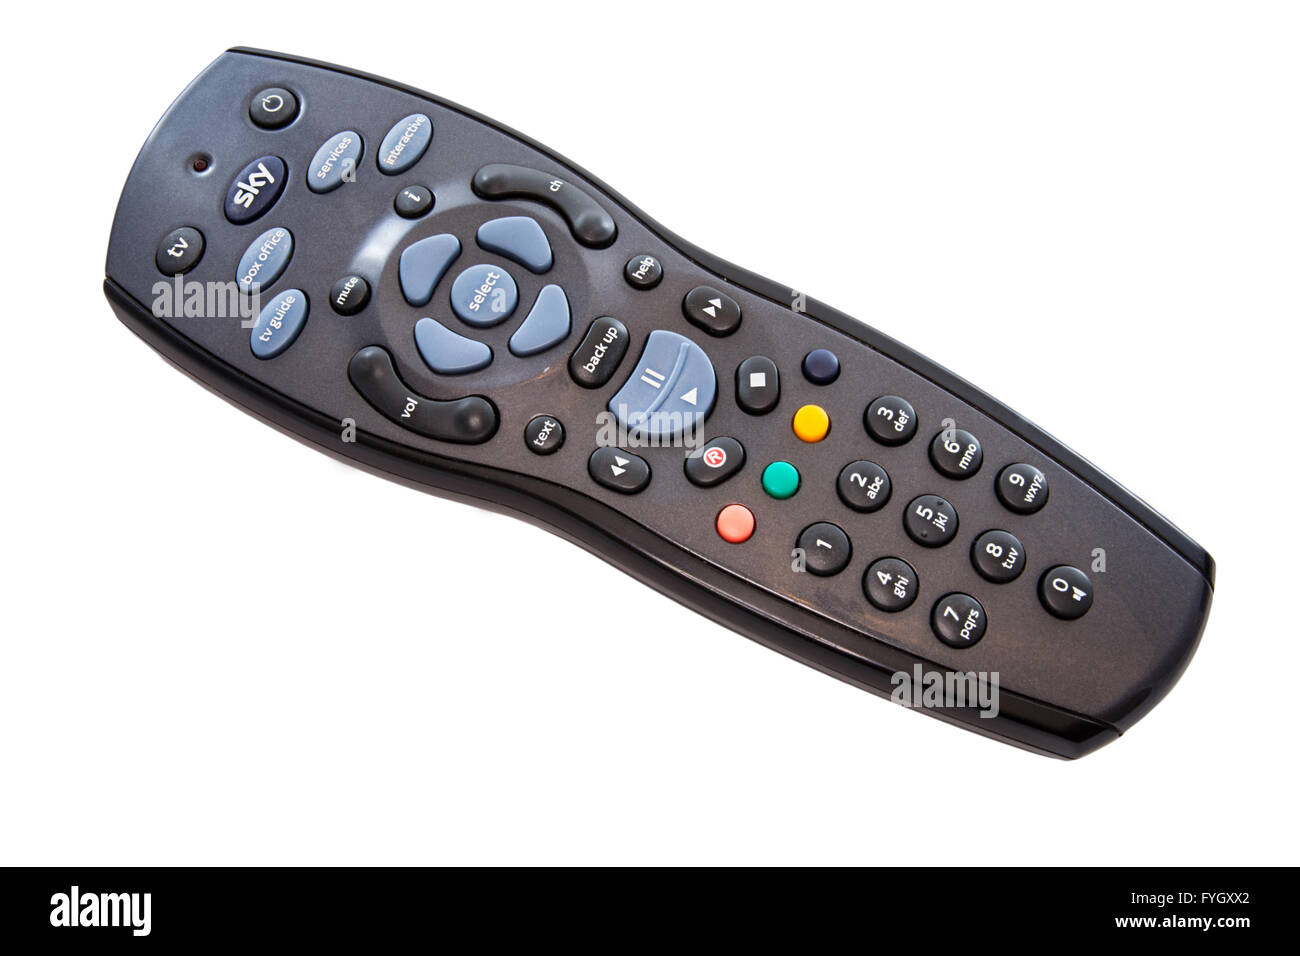 Sky remote against a pure white background. Stock Photo